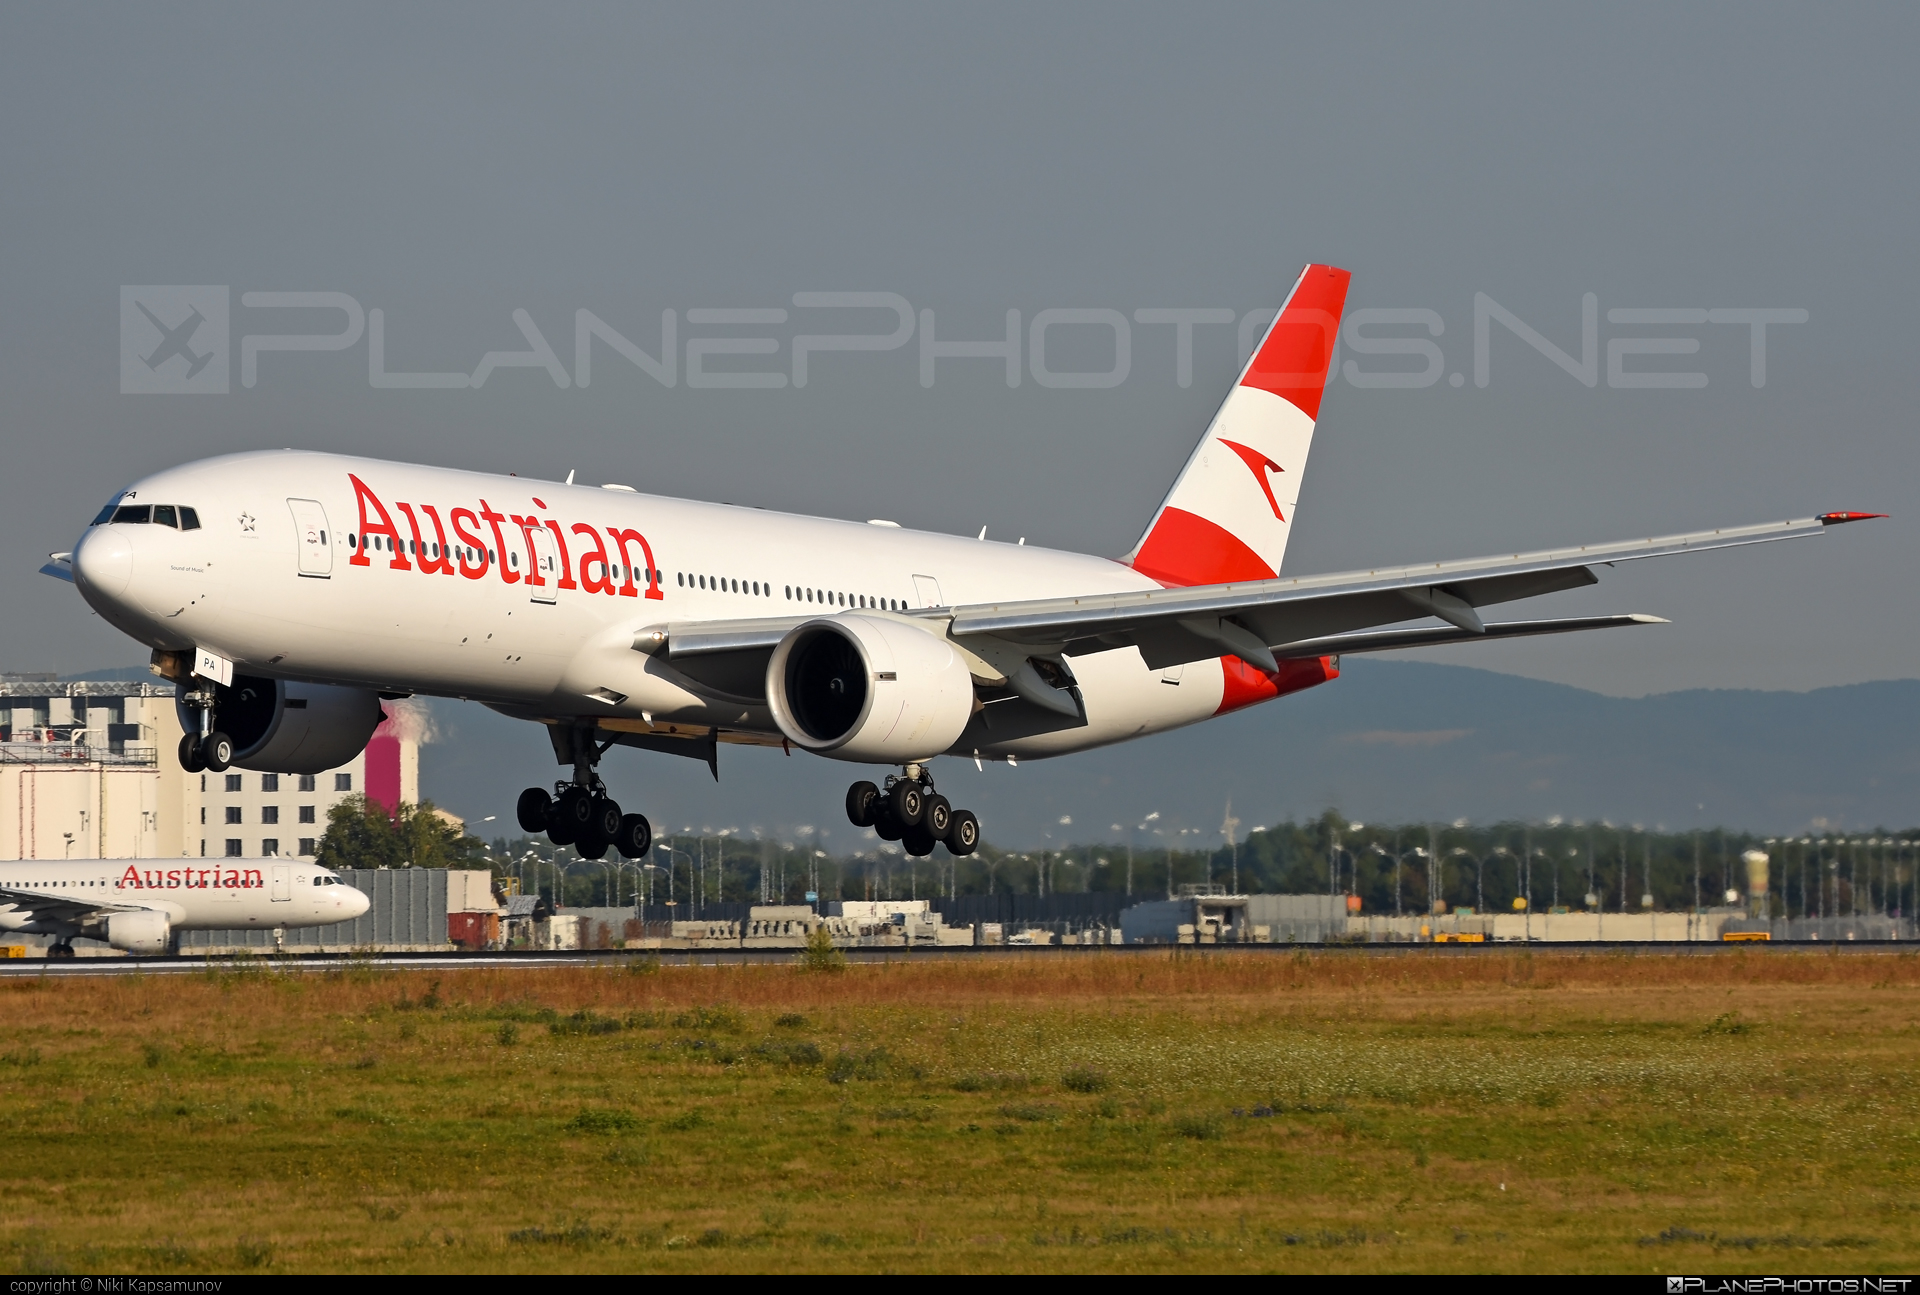 Boeing 777-200ER - OE-LPA operated by Austrian Airlines #austrian #austrianAirlines #b777 #b777er #boeing #boeing777 #tripleseven